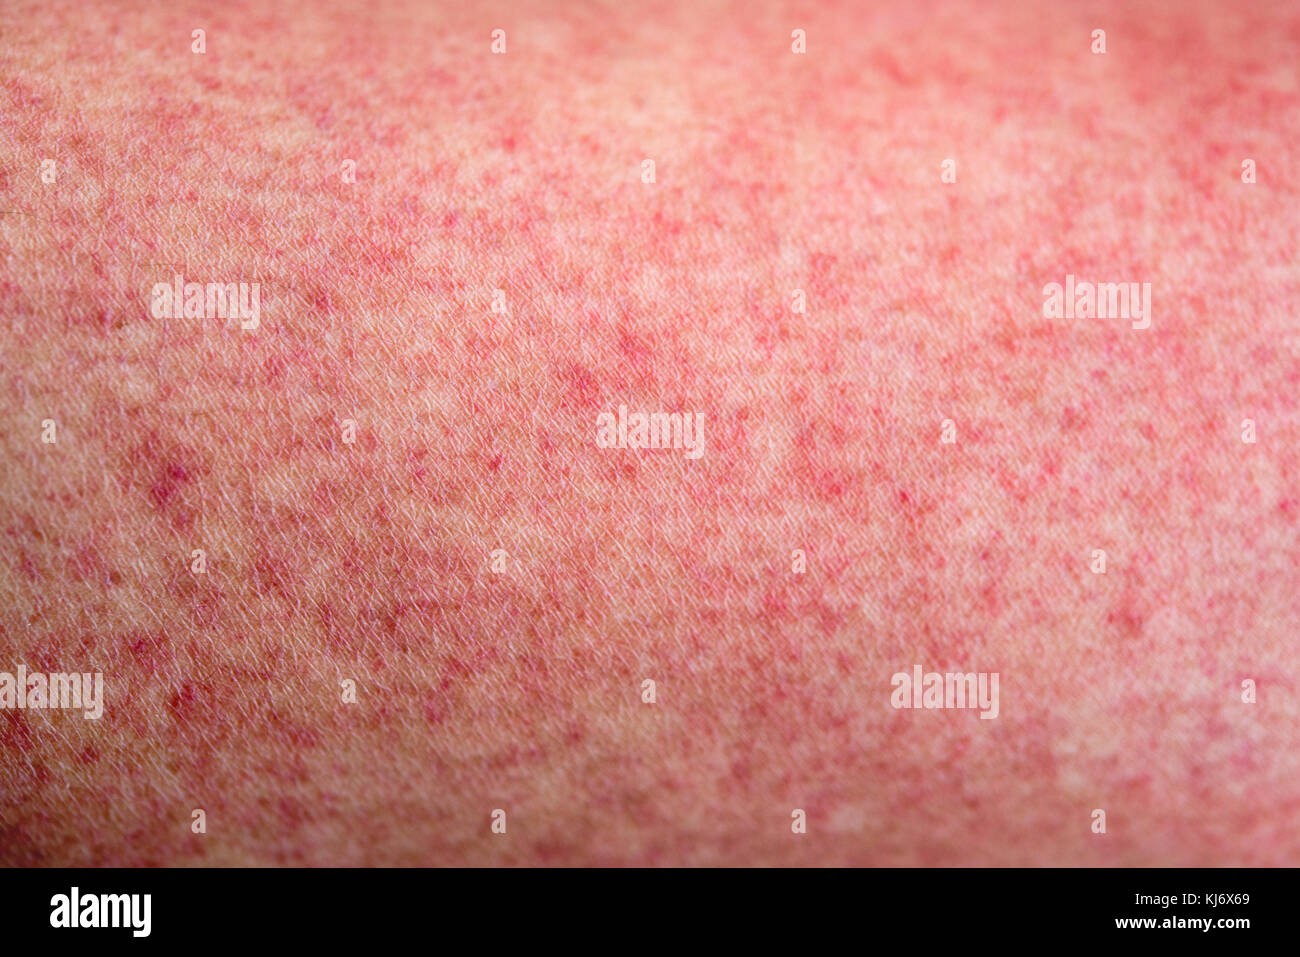 Close up human skin with dengue fever red rashes Stock Photo